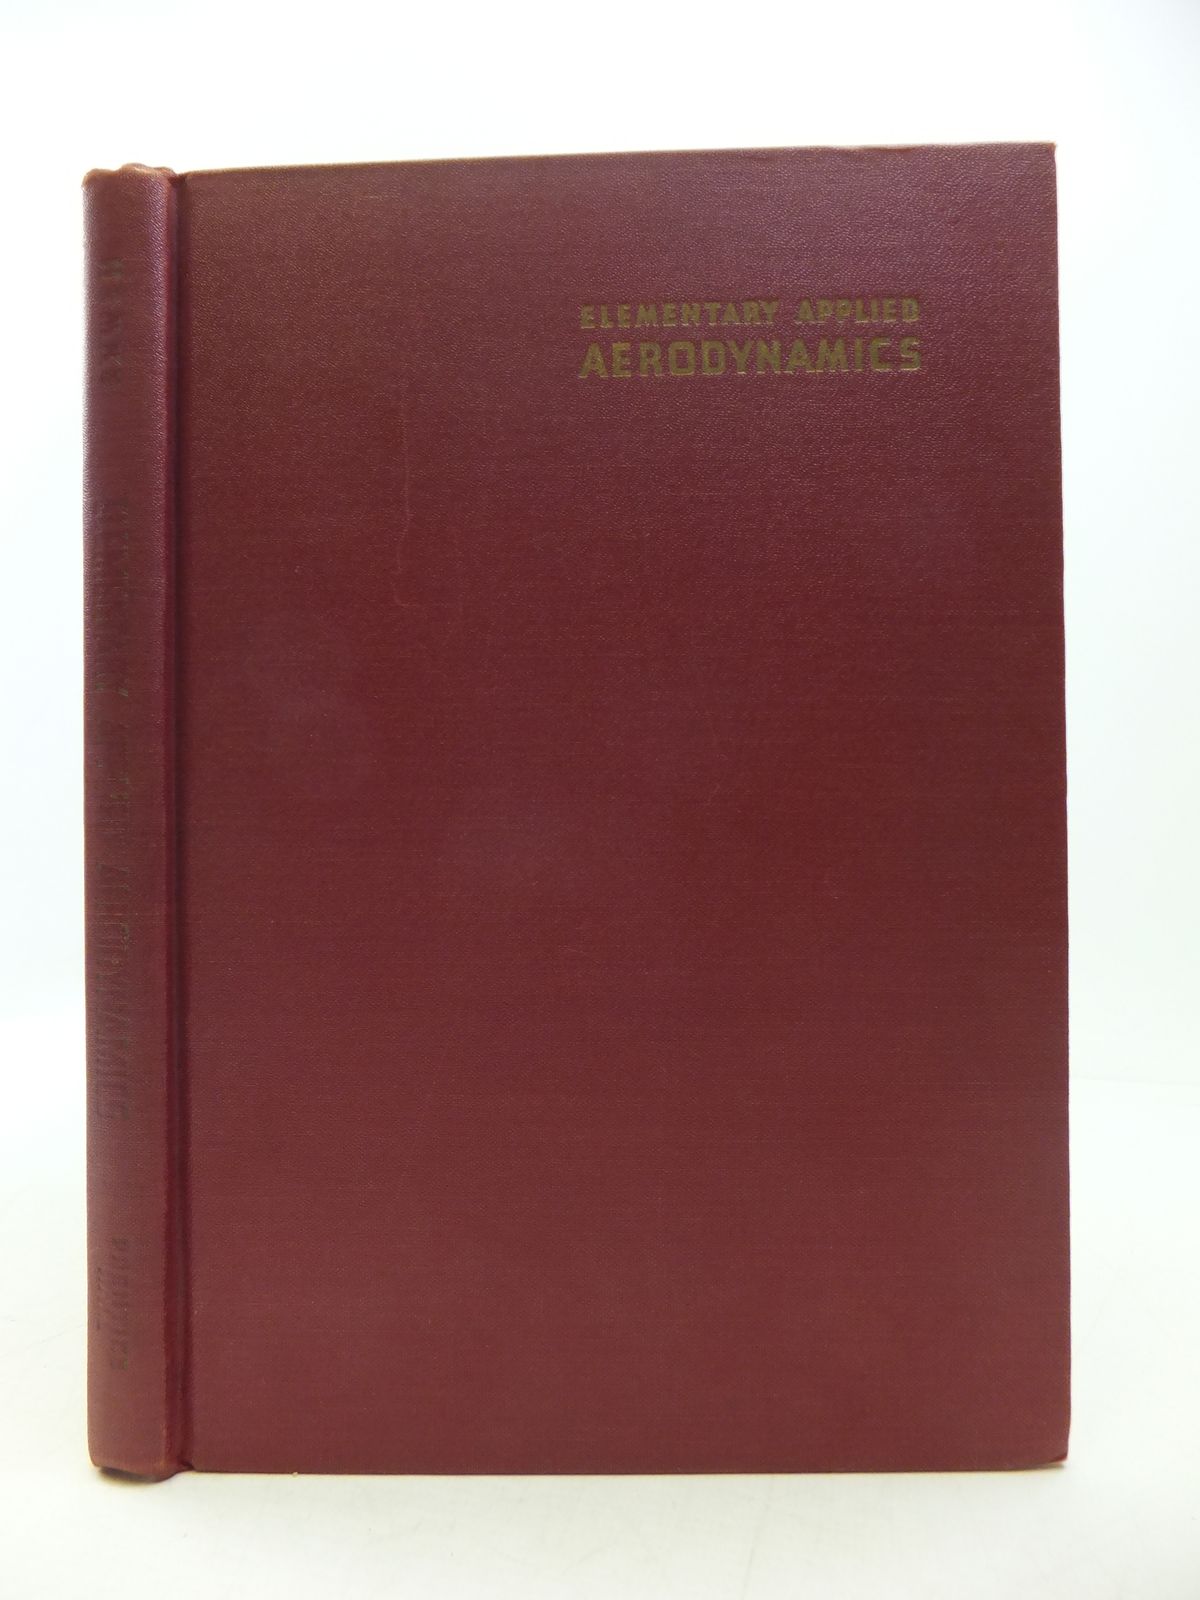 Photo of ELEMENTARY APPLIED AERODYNAMICS written by Hemke, Paul E. published by Constable and Company Ltd. (STOCK CODE: 1808159)  for sale by Stella & Rose's Books